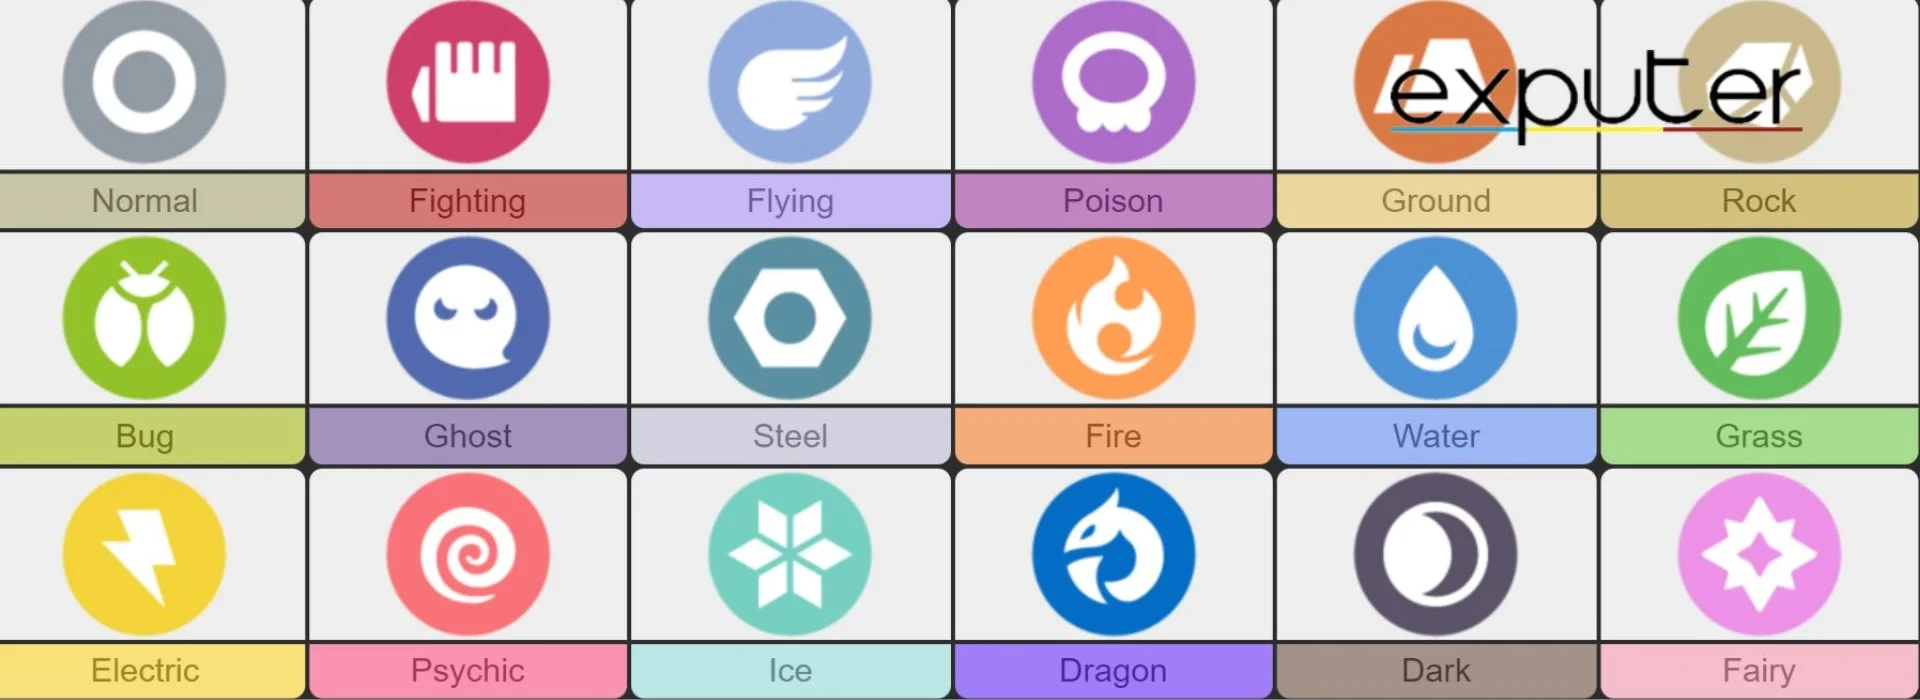 Pokémon type chart  Strengths, weaknesses and effectiveness of